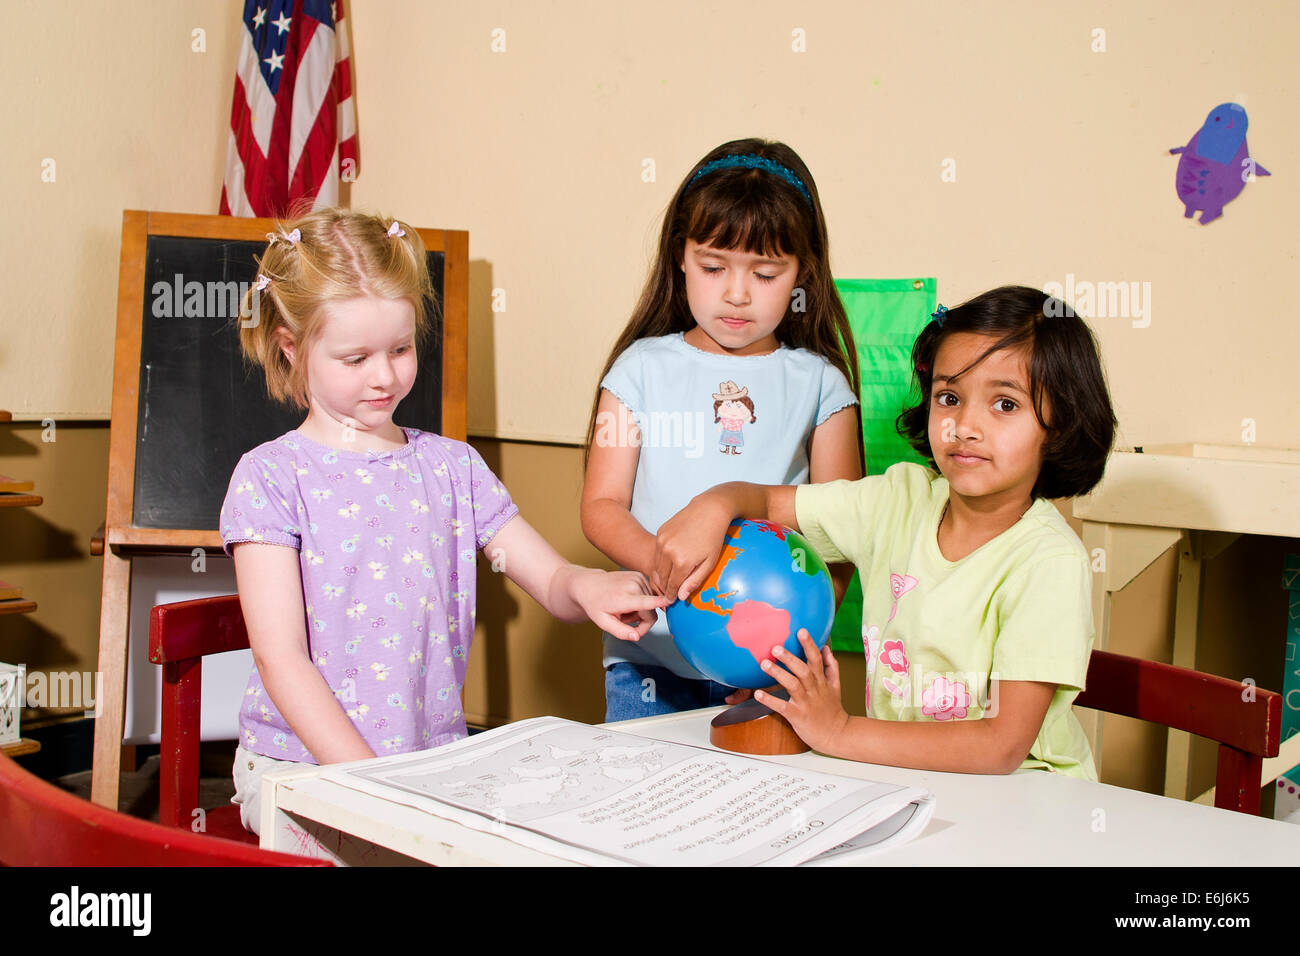 multi ethnic racial diversity diverse multicultural group 4-5 year old Girls person people map kindergarten classroom eye contact looking globe table Stock Photo